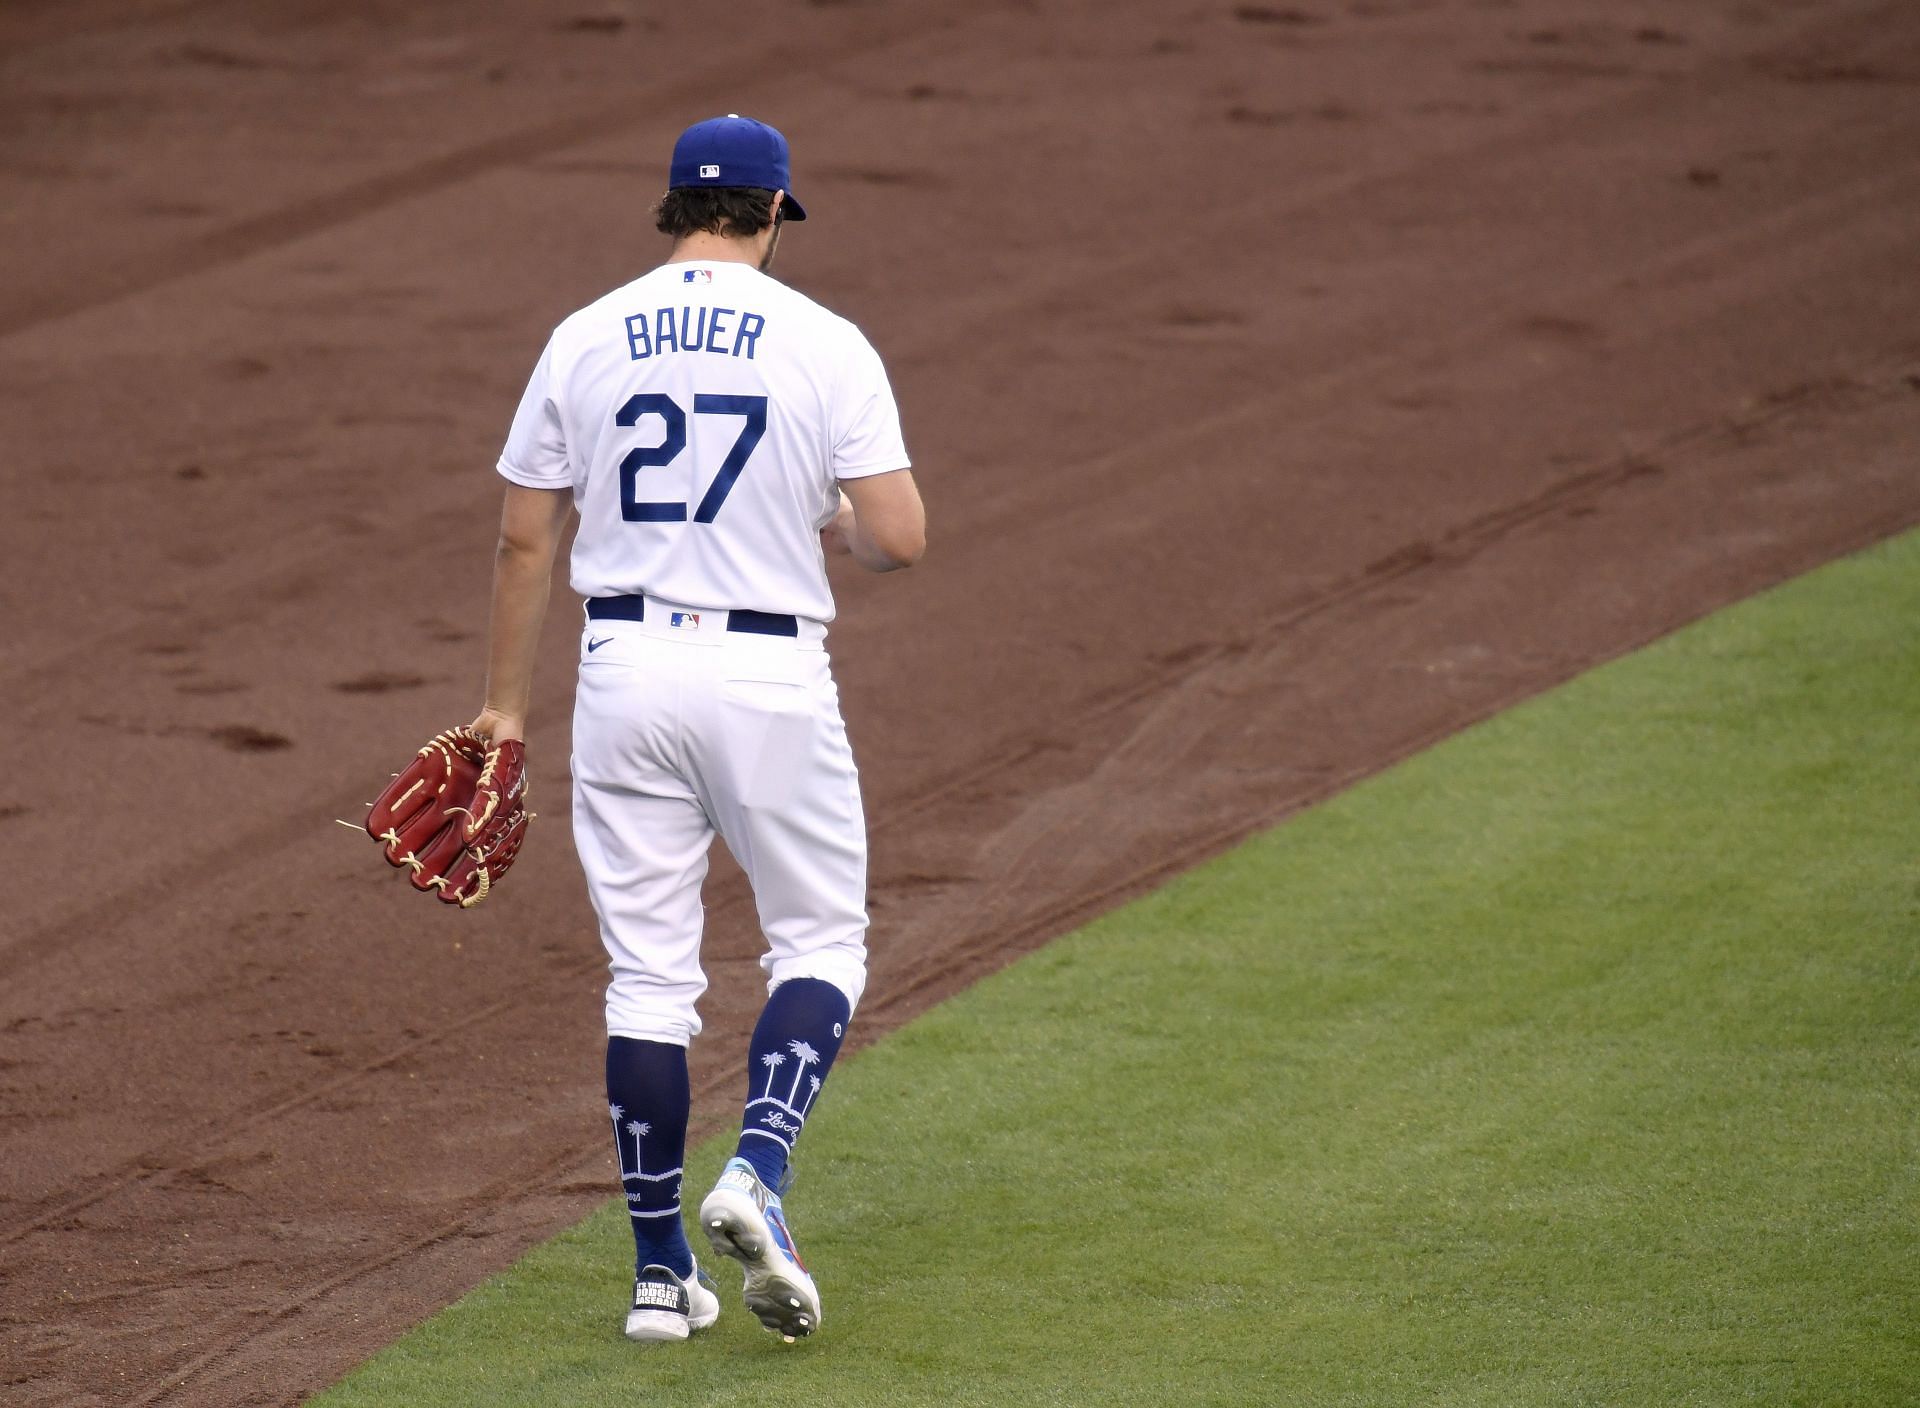 Trevor Bauer played for the Dodgers before heading to Japan